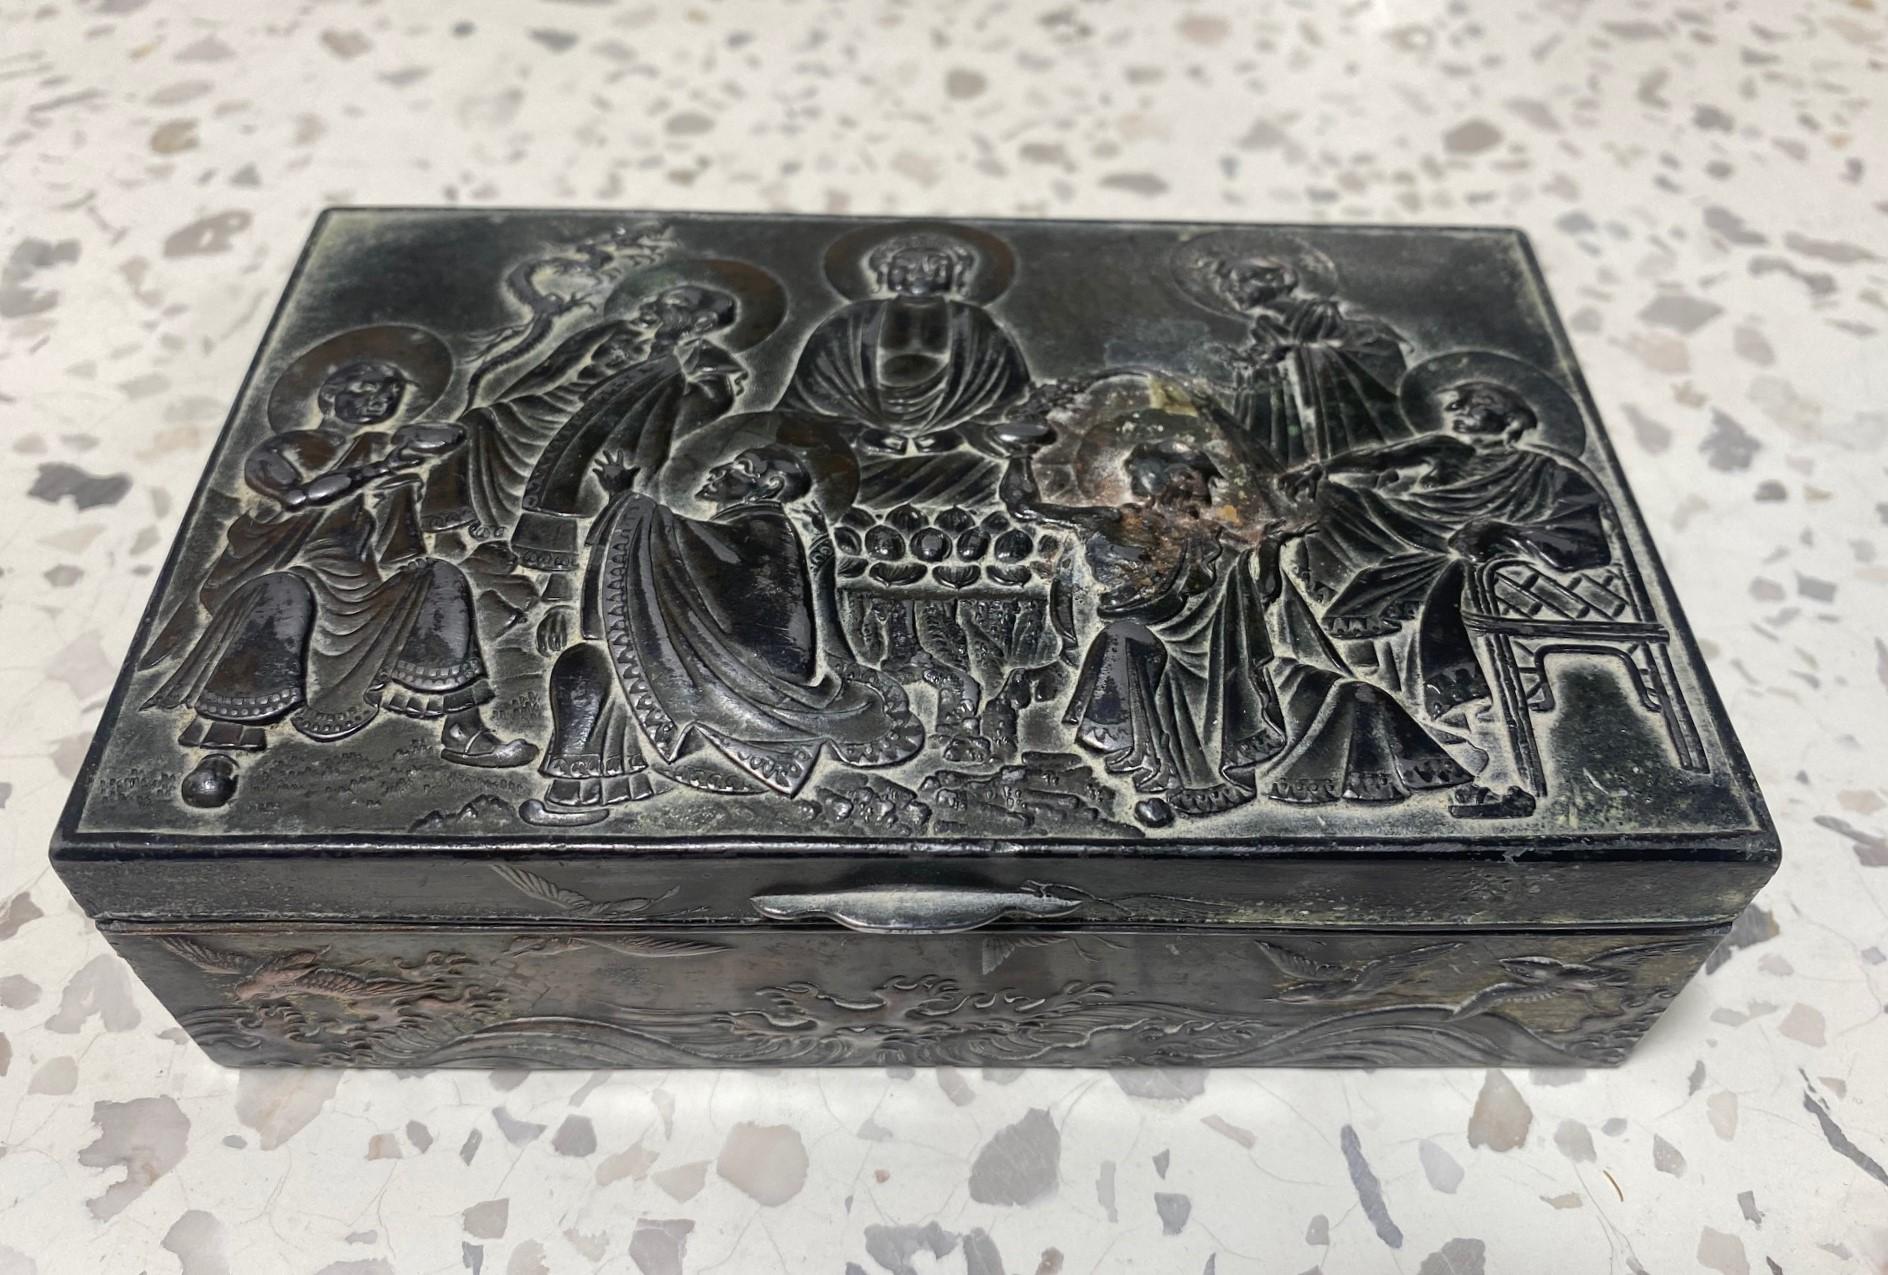 A beautifully crafted and artistically detailed pressed Repousse-designed metal (we were told by the previous owner that it is possibly silver plated on copper but we have not tested it to verify) Japanese collectible trinket or tobacco box.  The